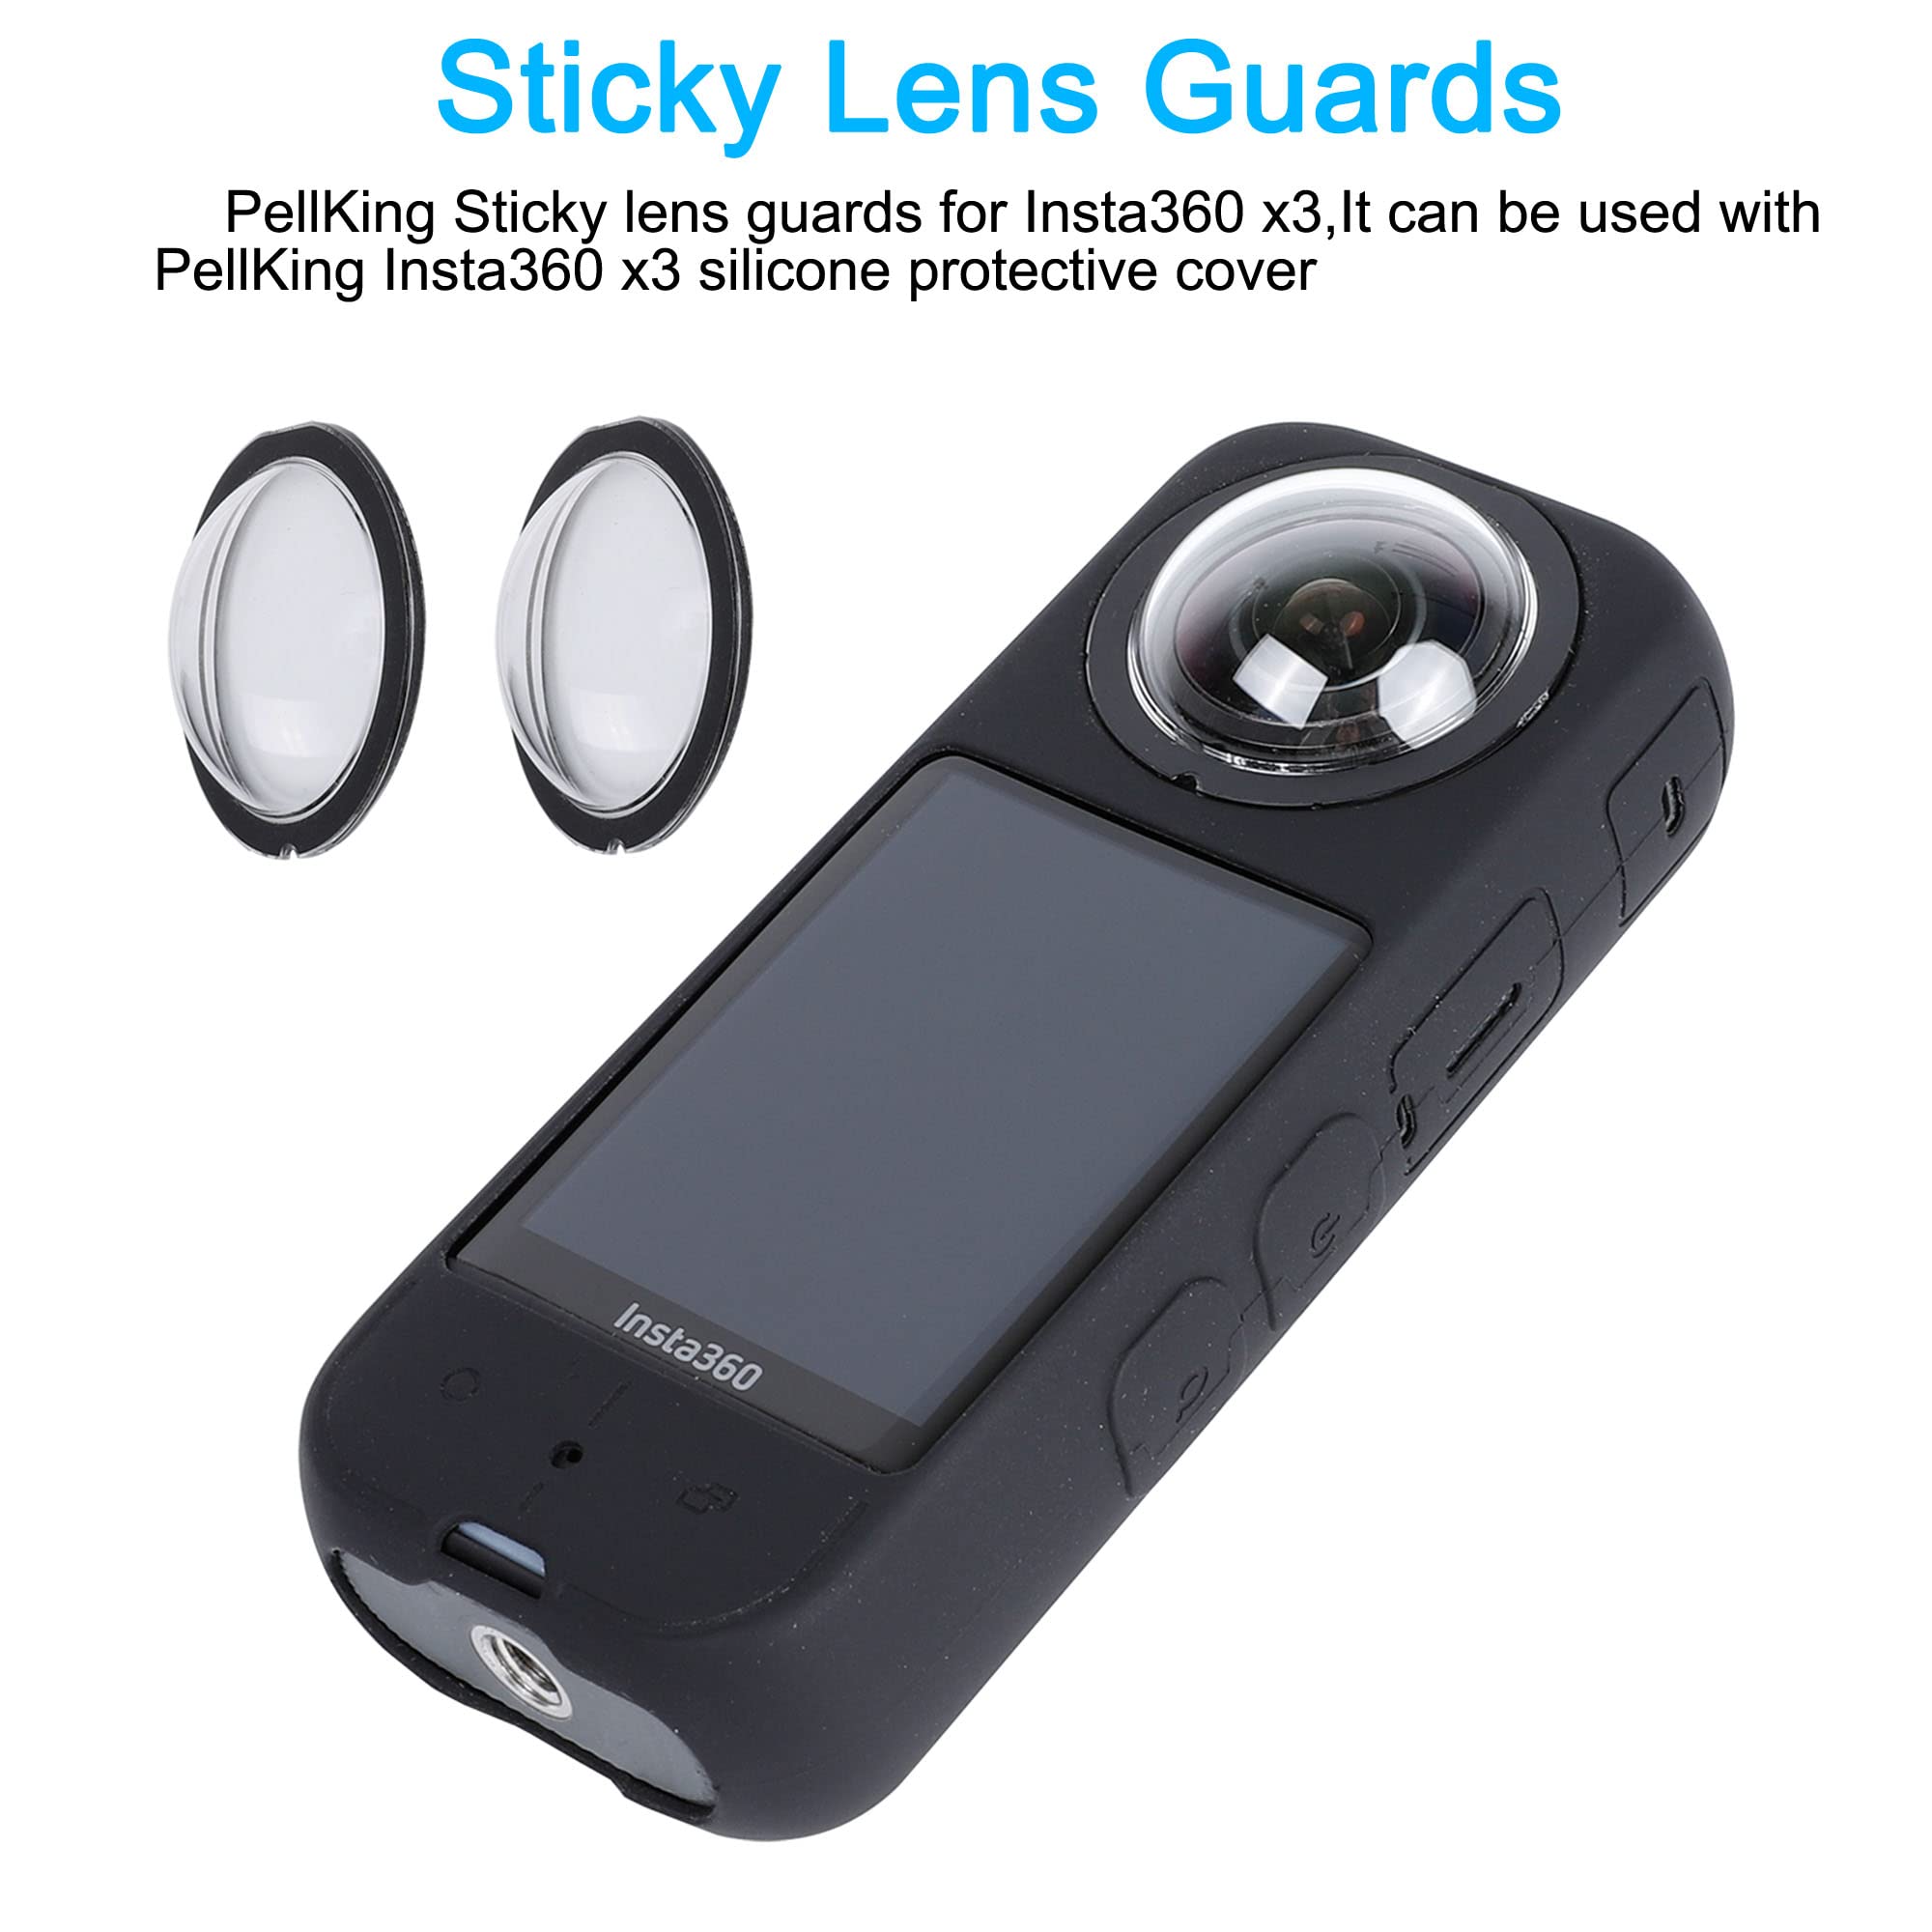 PellKing Camera Protective Accessories Kit for Insta360 X3, Inst 360 X3 Bundle Include Lens Guard/Silicone Protective Cover/Screen Protectors/Camera Case